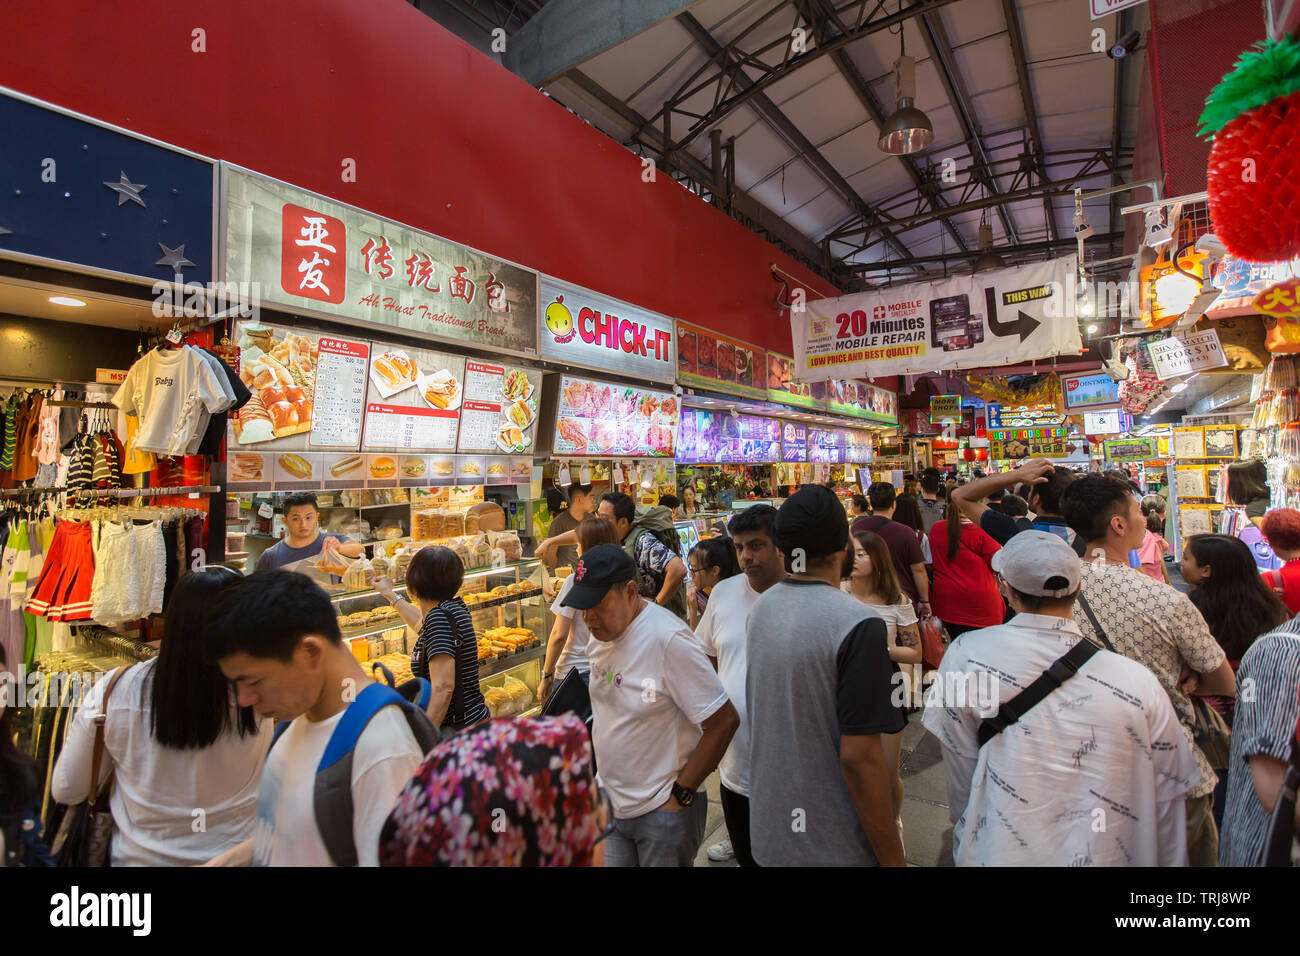 Crowded view of Bugis street, here is a section selling some streets food, Singapore Stock Photo